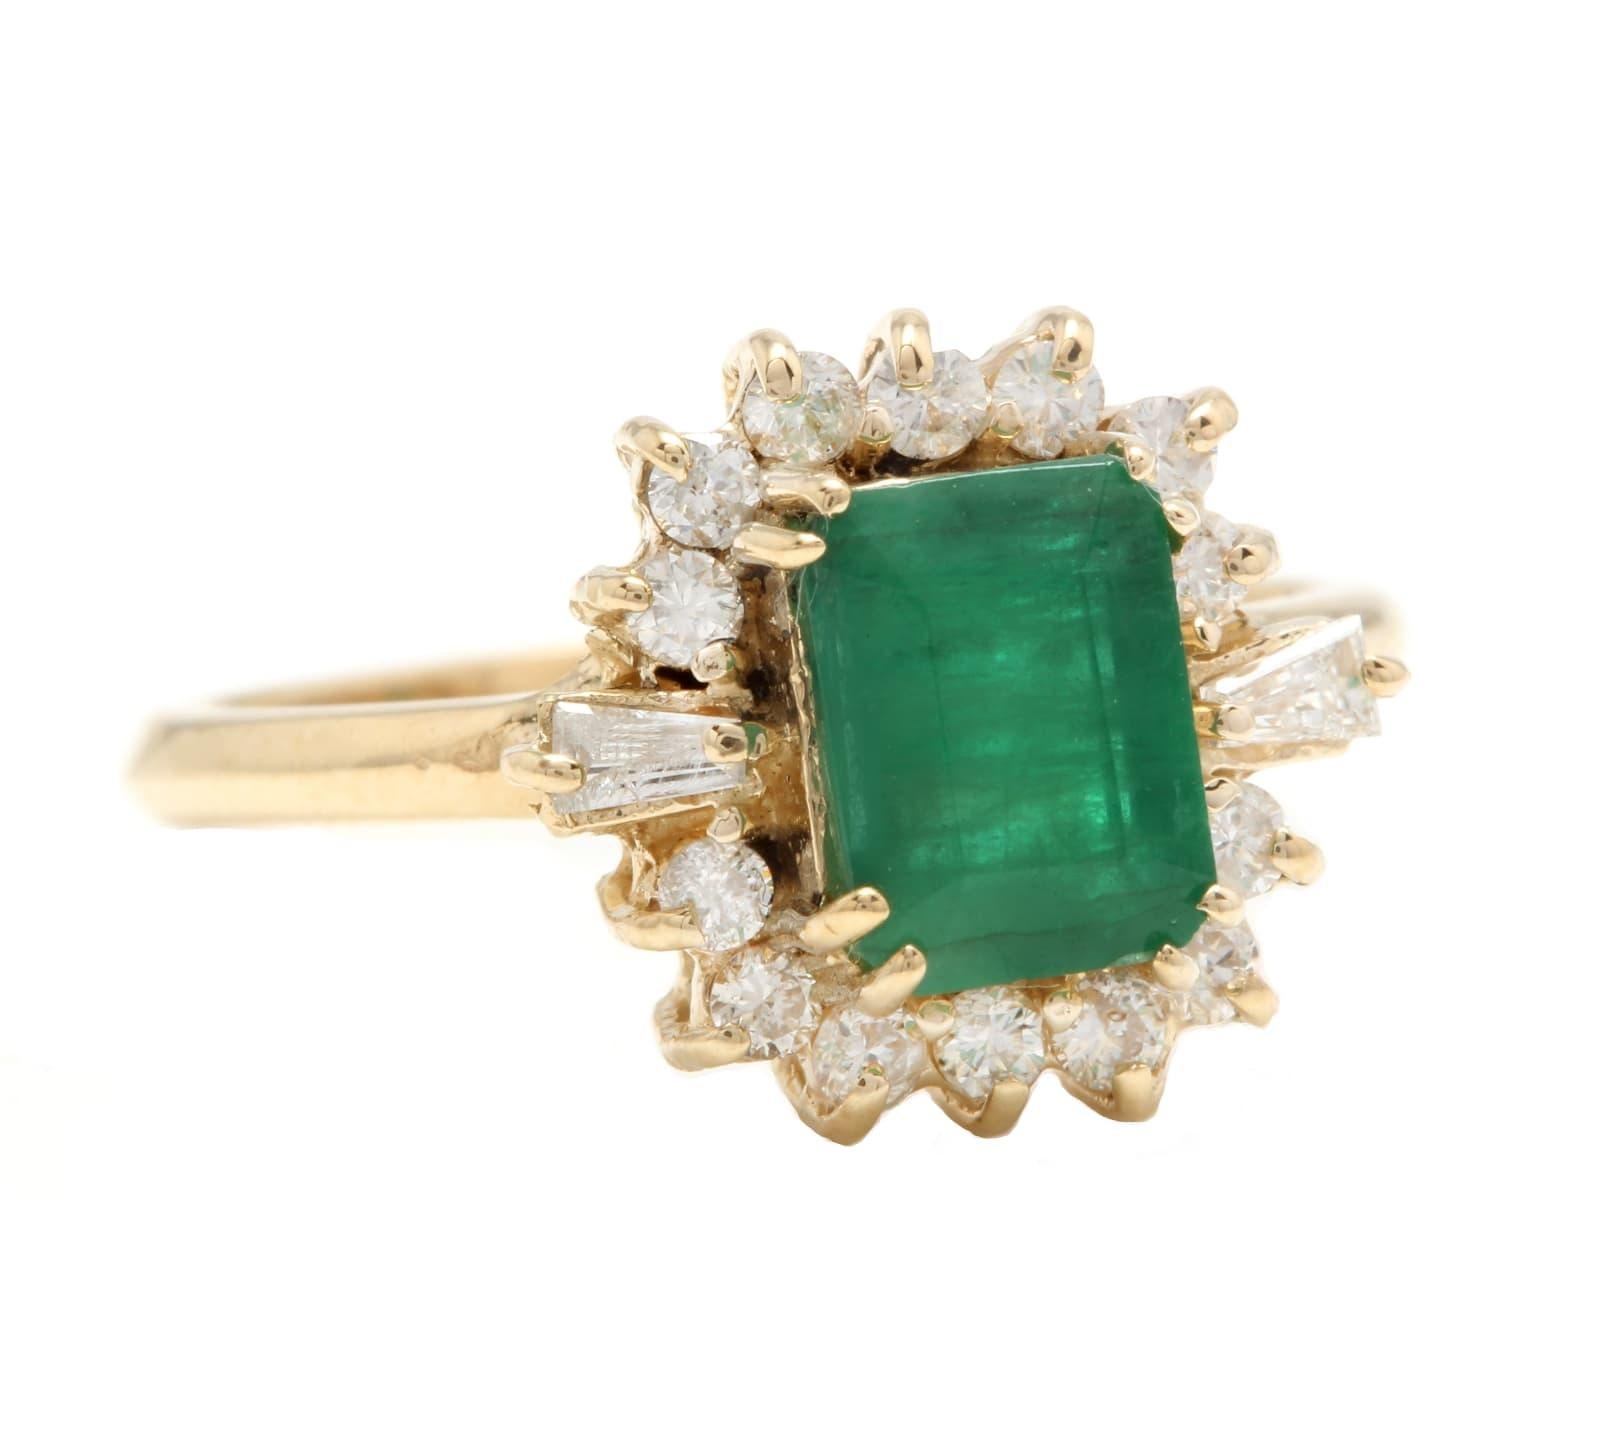 1.50 Carats Natural Emerald and Diamond 14K Solid Yellow Gold Ring

Suggested Replacement Value: $2,500.00

Total Natural Green Emerald Weight is: Approx. 1.15 Carats 

Emerald Measures: Approx. 7.00 x 5.00mm

Natural Round Diamonds Weight: Approx.